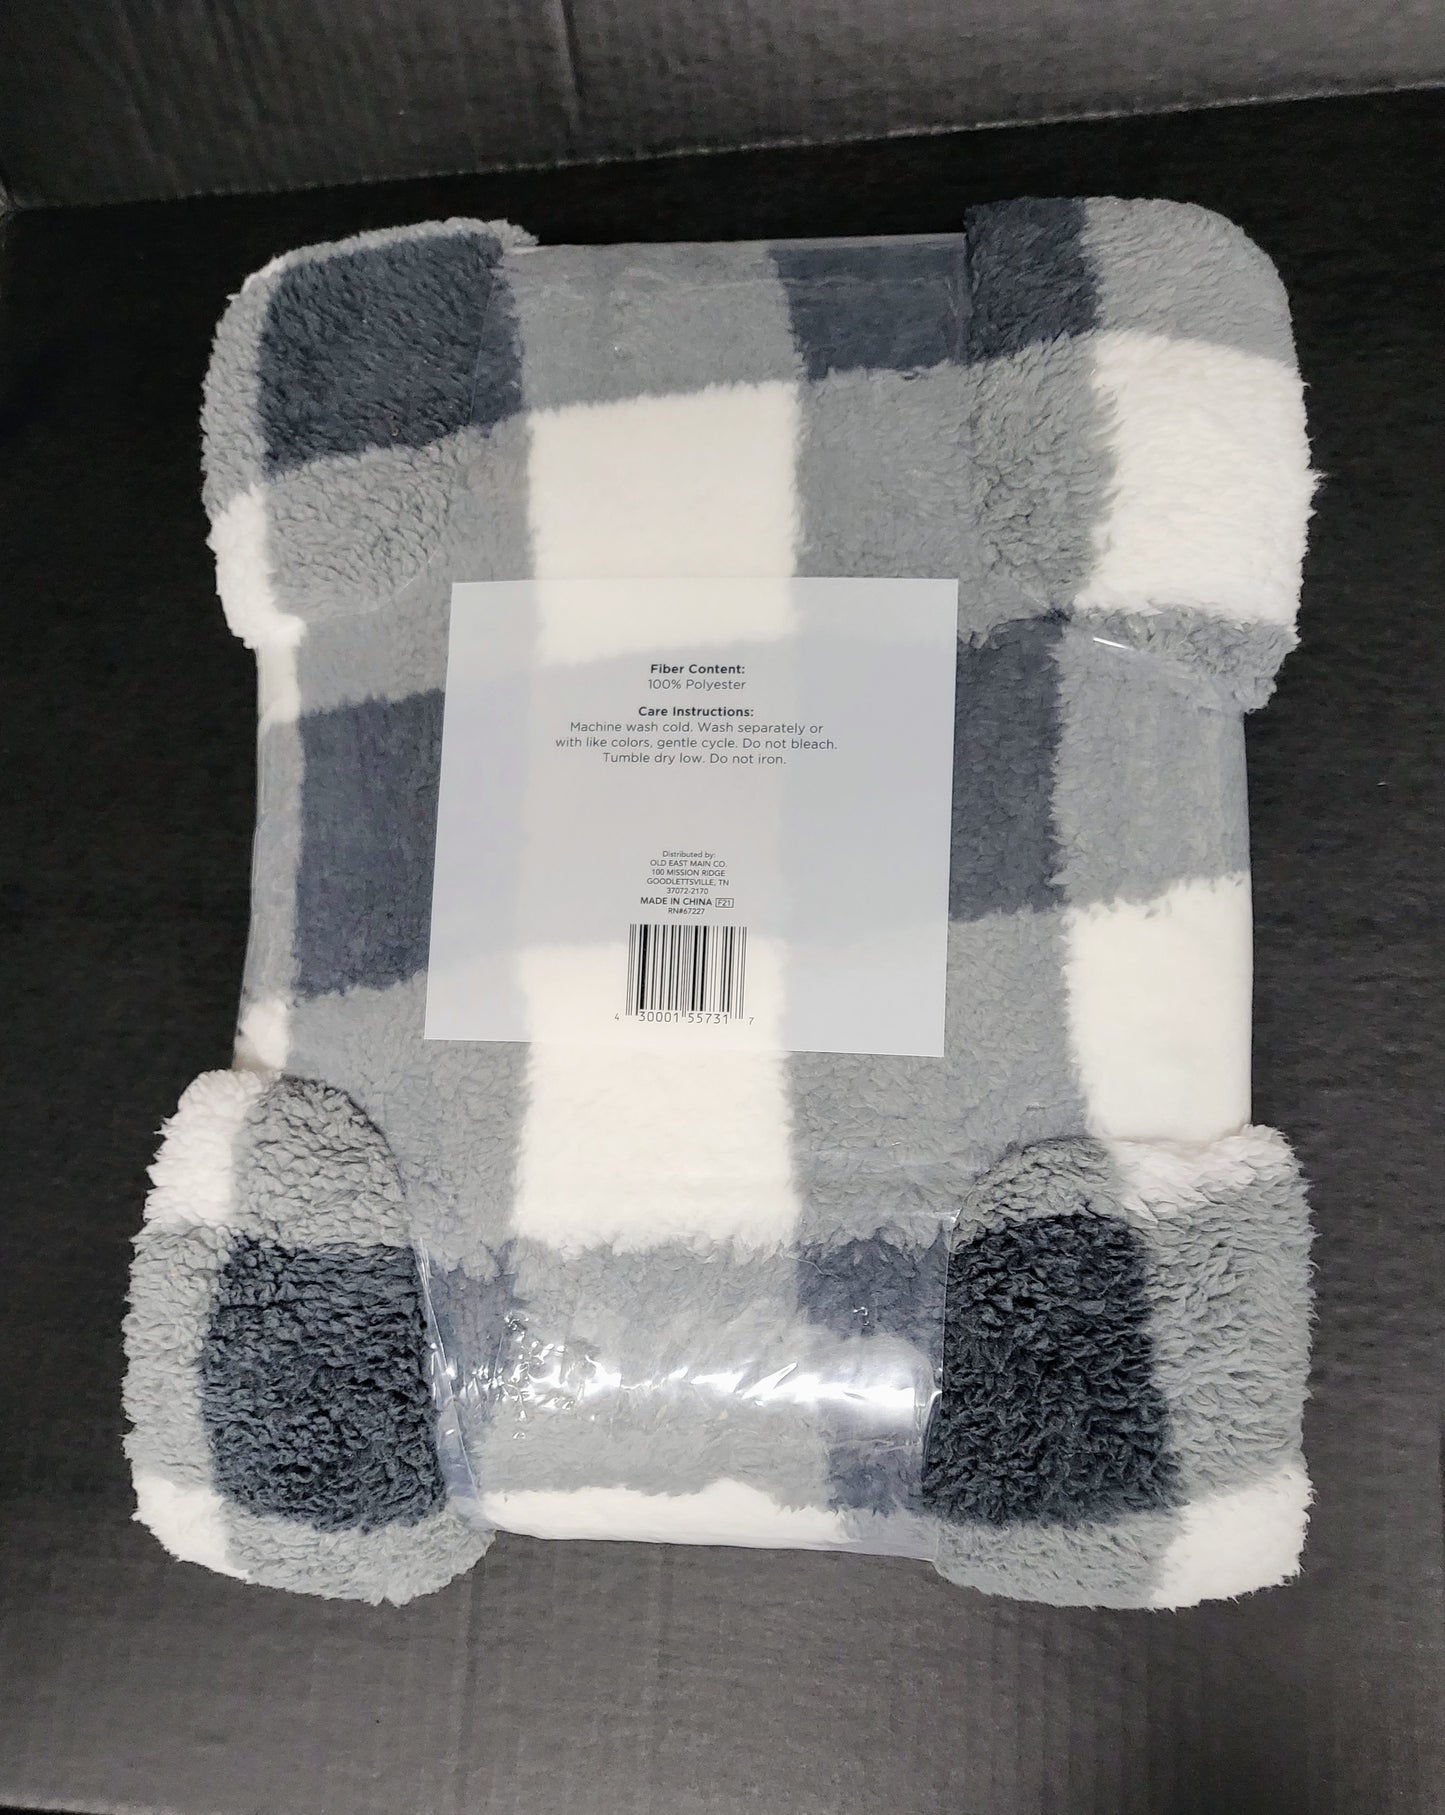 Double Sided Printed Sherpa Throw 50in x 60in Grey Plaid